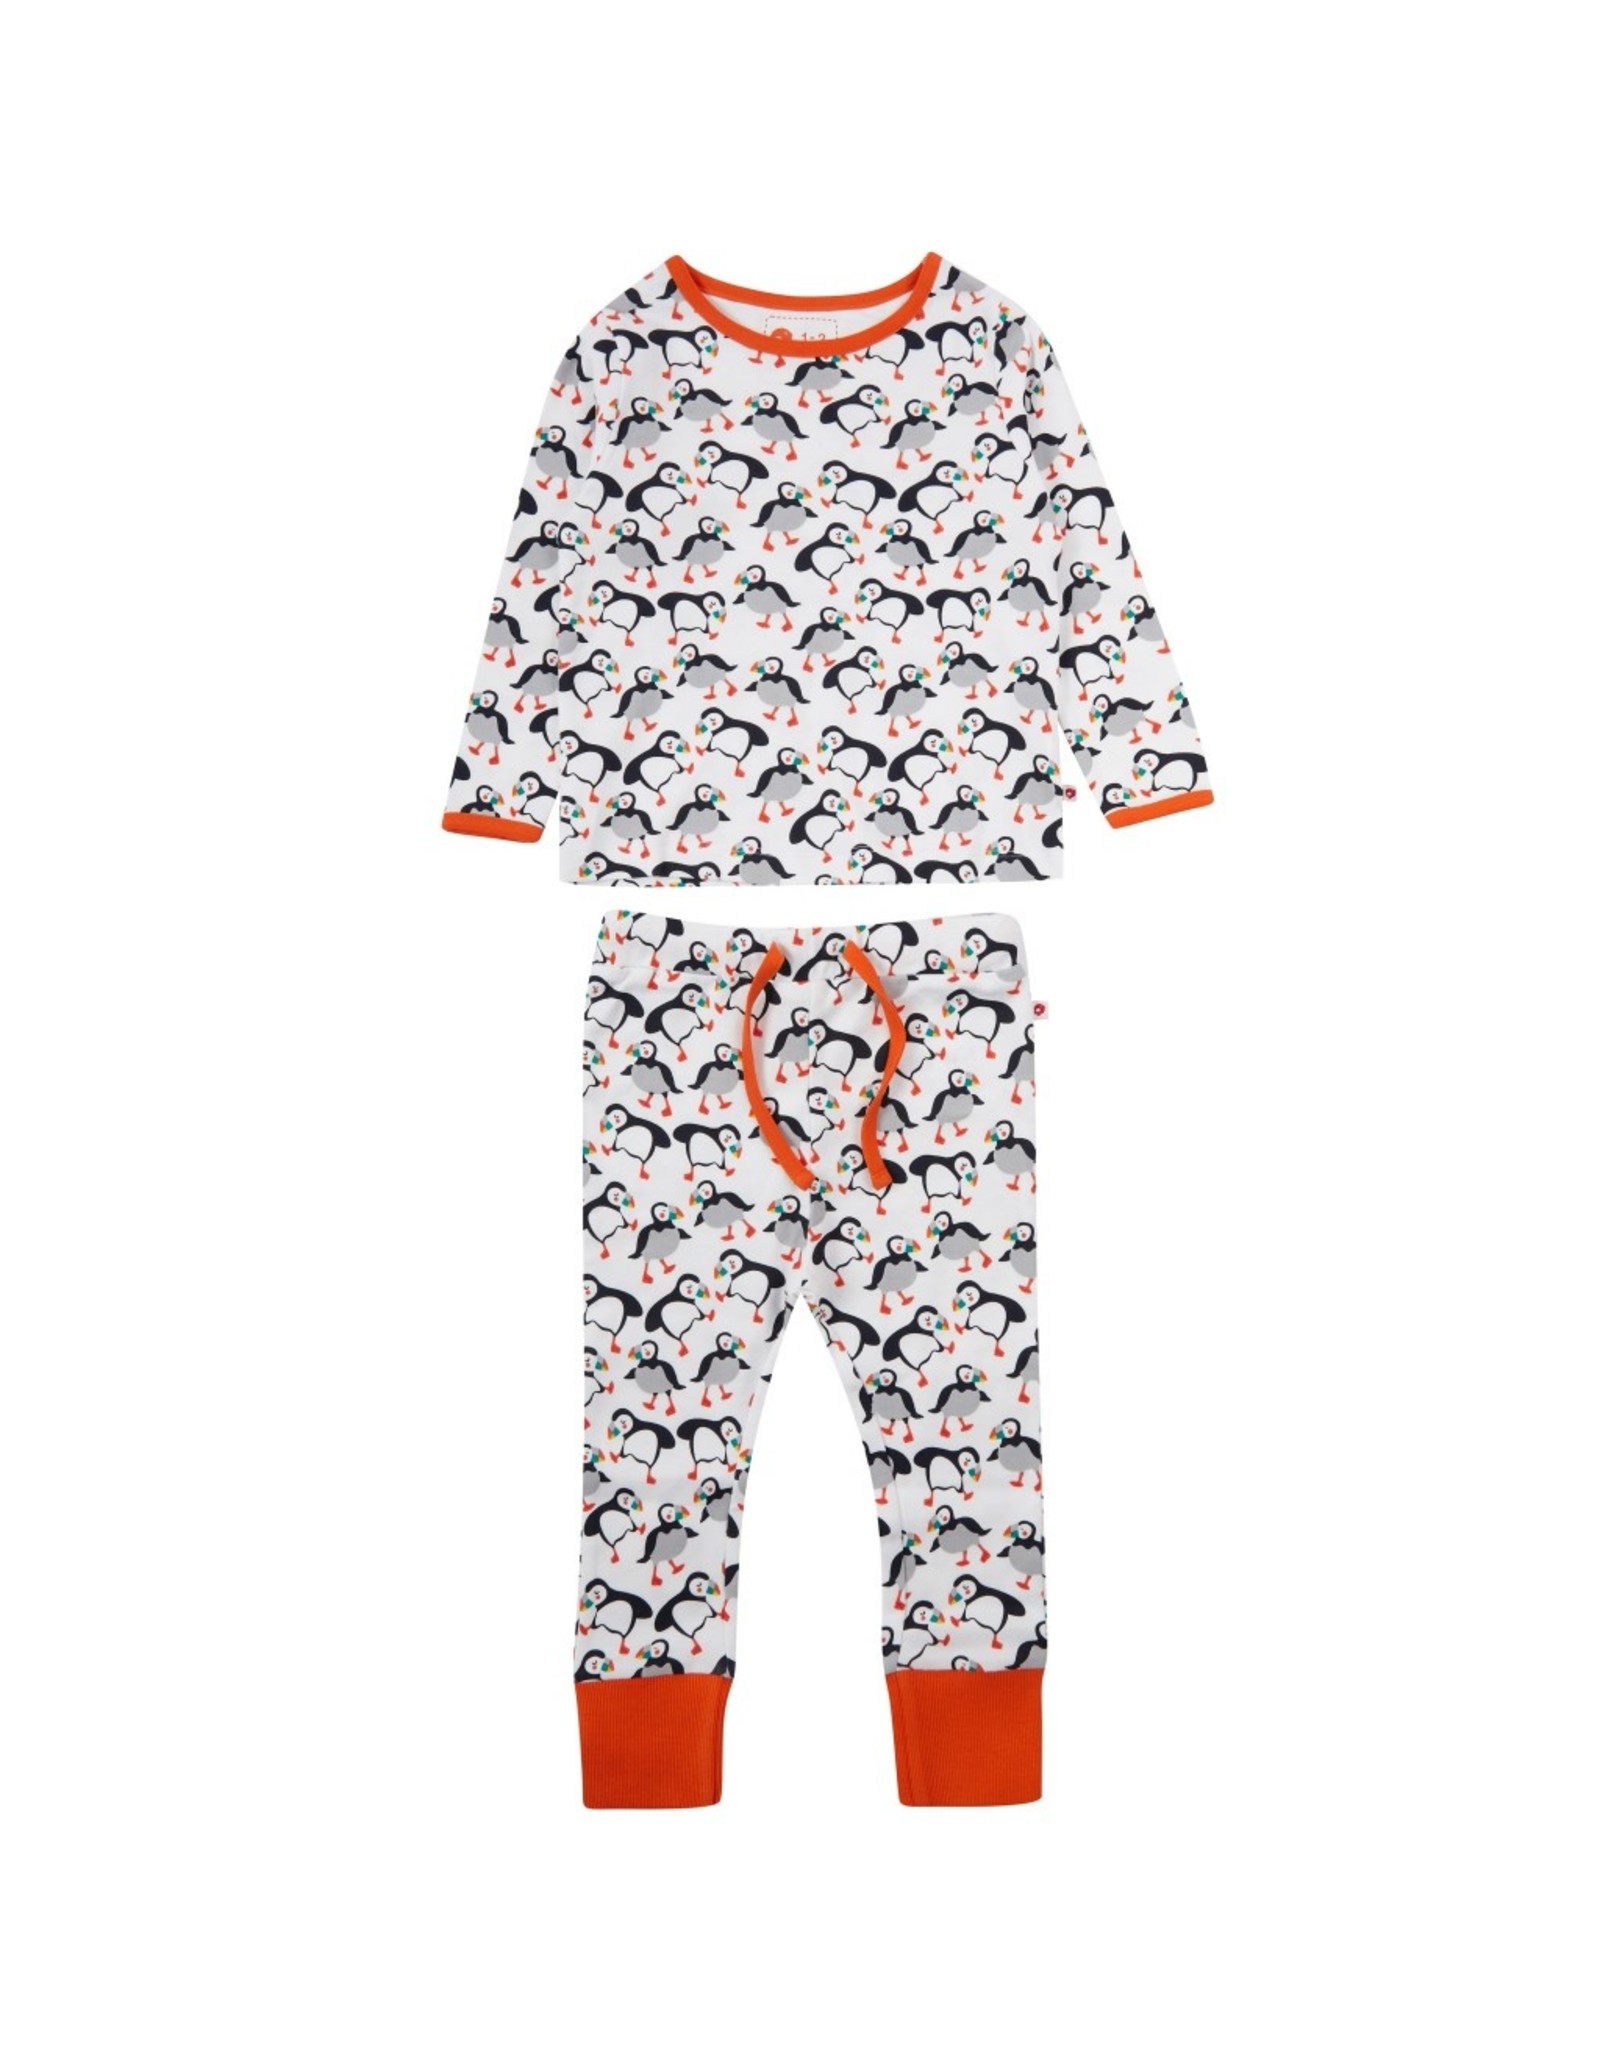 Piccalilly Piccalilly Kids Pyjamas- Puffins